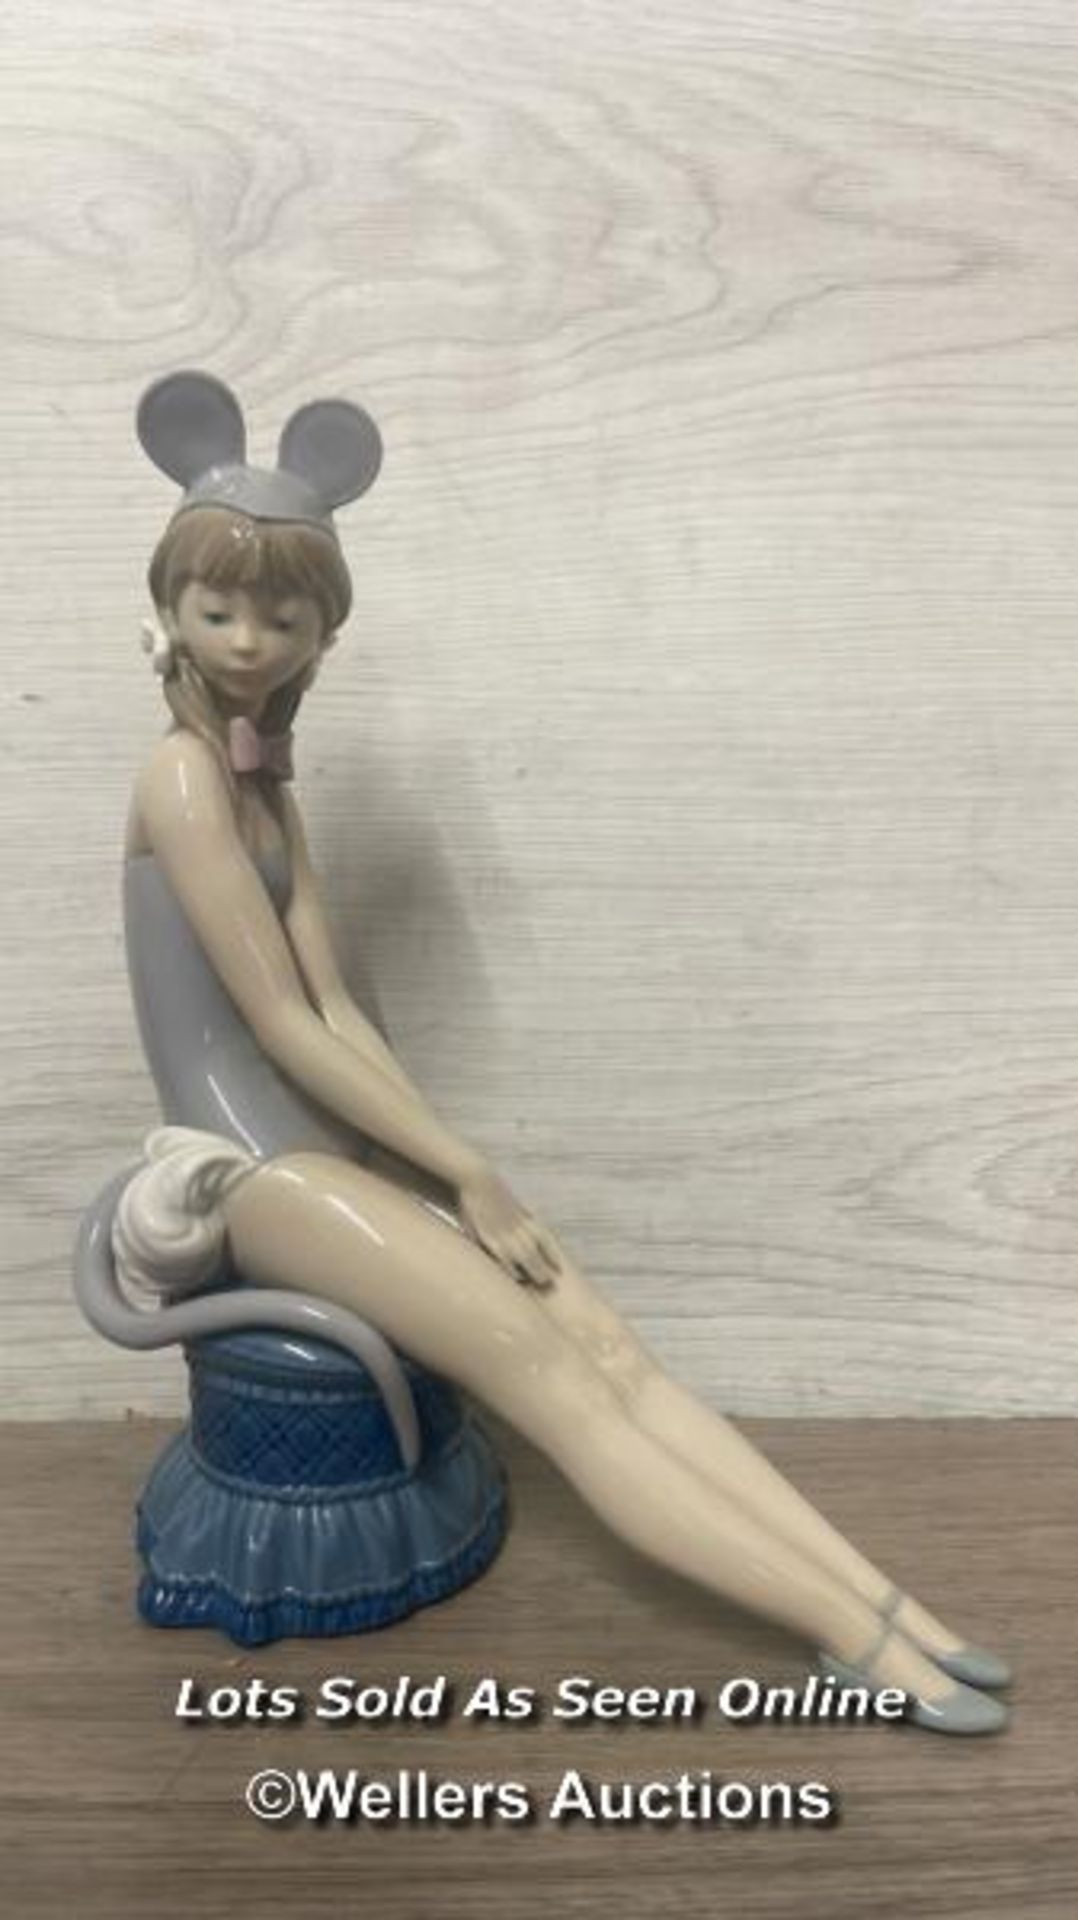 A RETIRED LLADRO FIGURE OF A SEATED GIRL DRESSED AS A MOUSE NO. 5162 'MINDY', 25CM HIGH, OVERALL